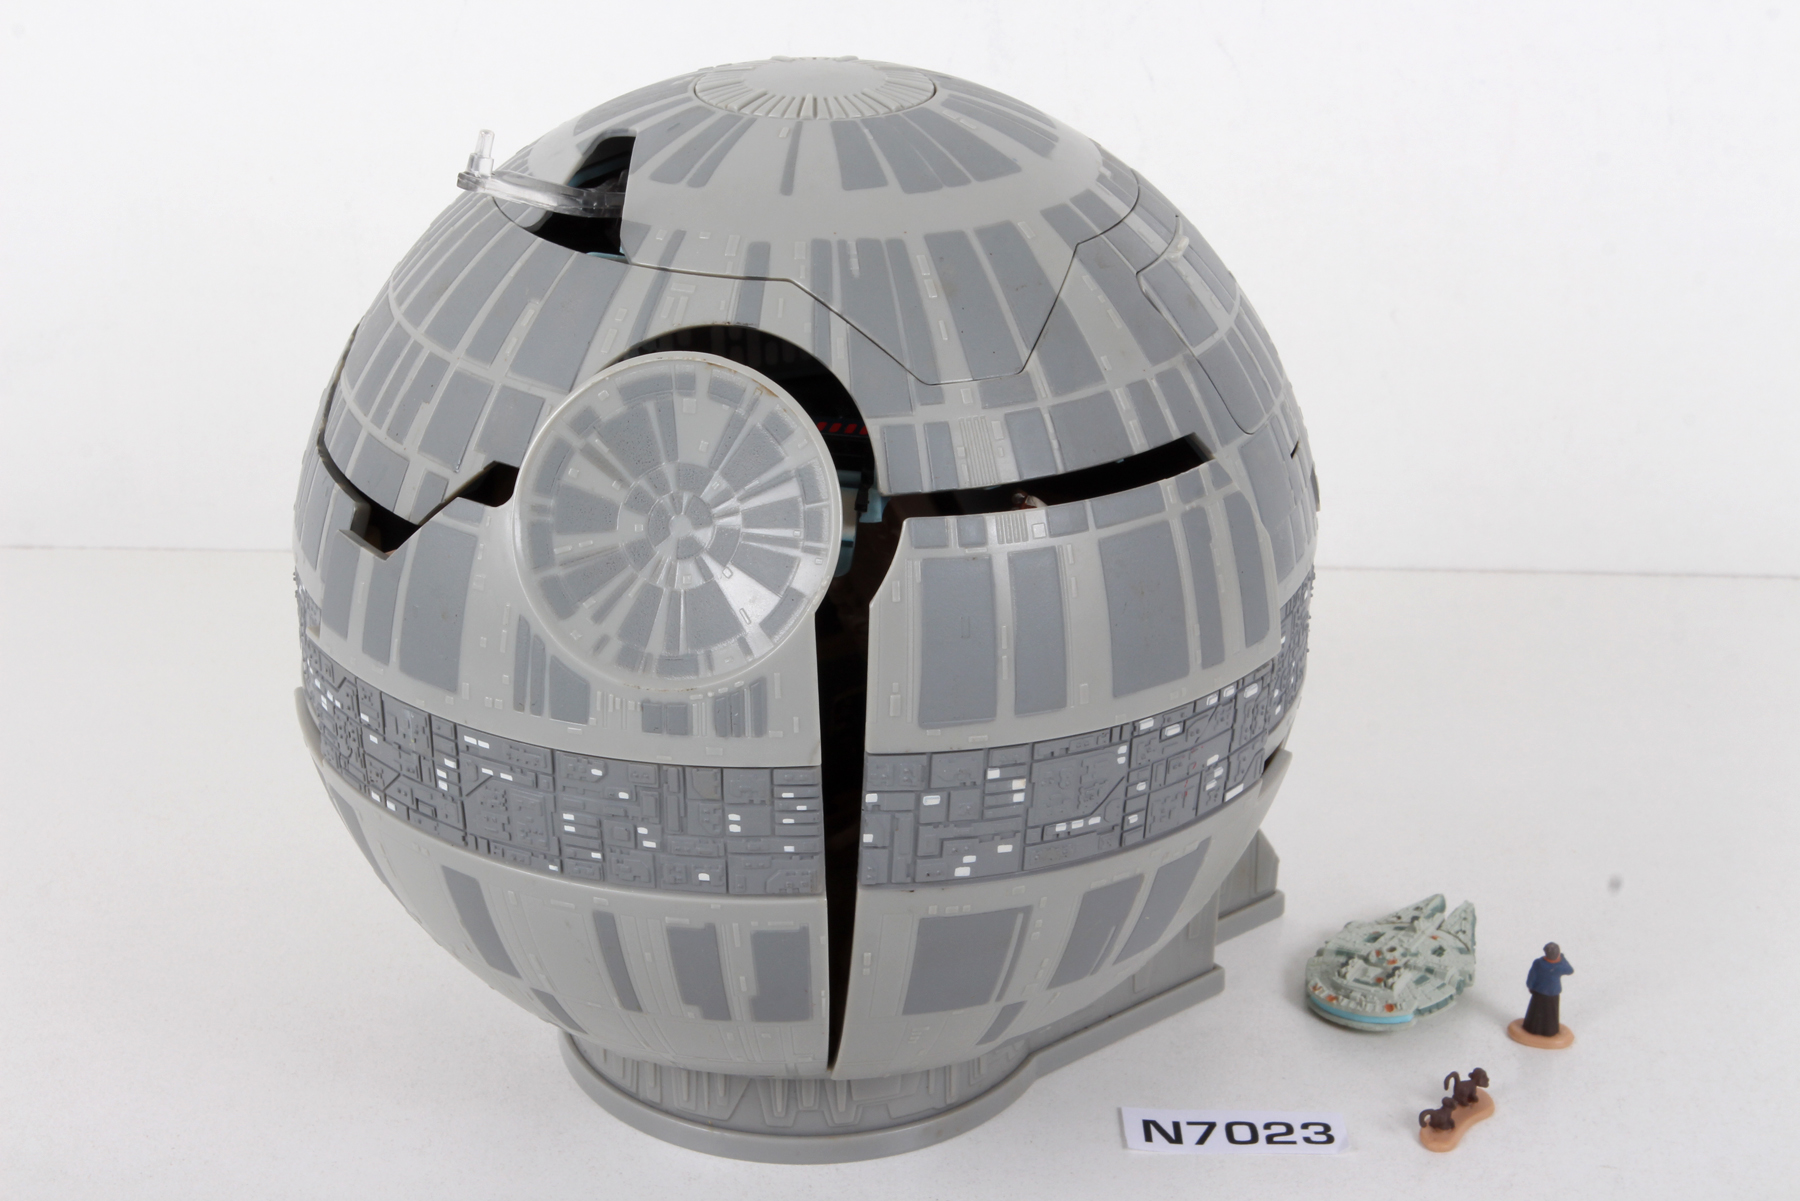 Stackable Star Wars Coasters Form A 3D Cross Section Of The Death Star